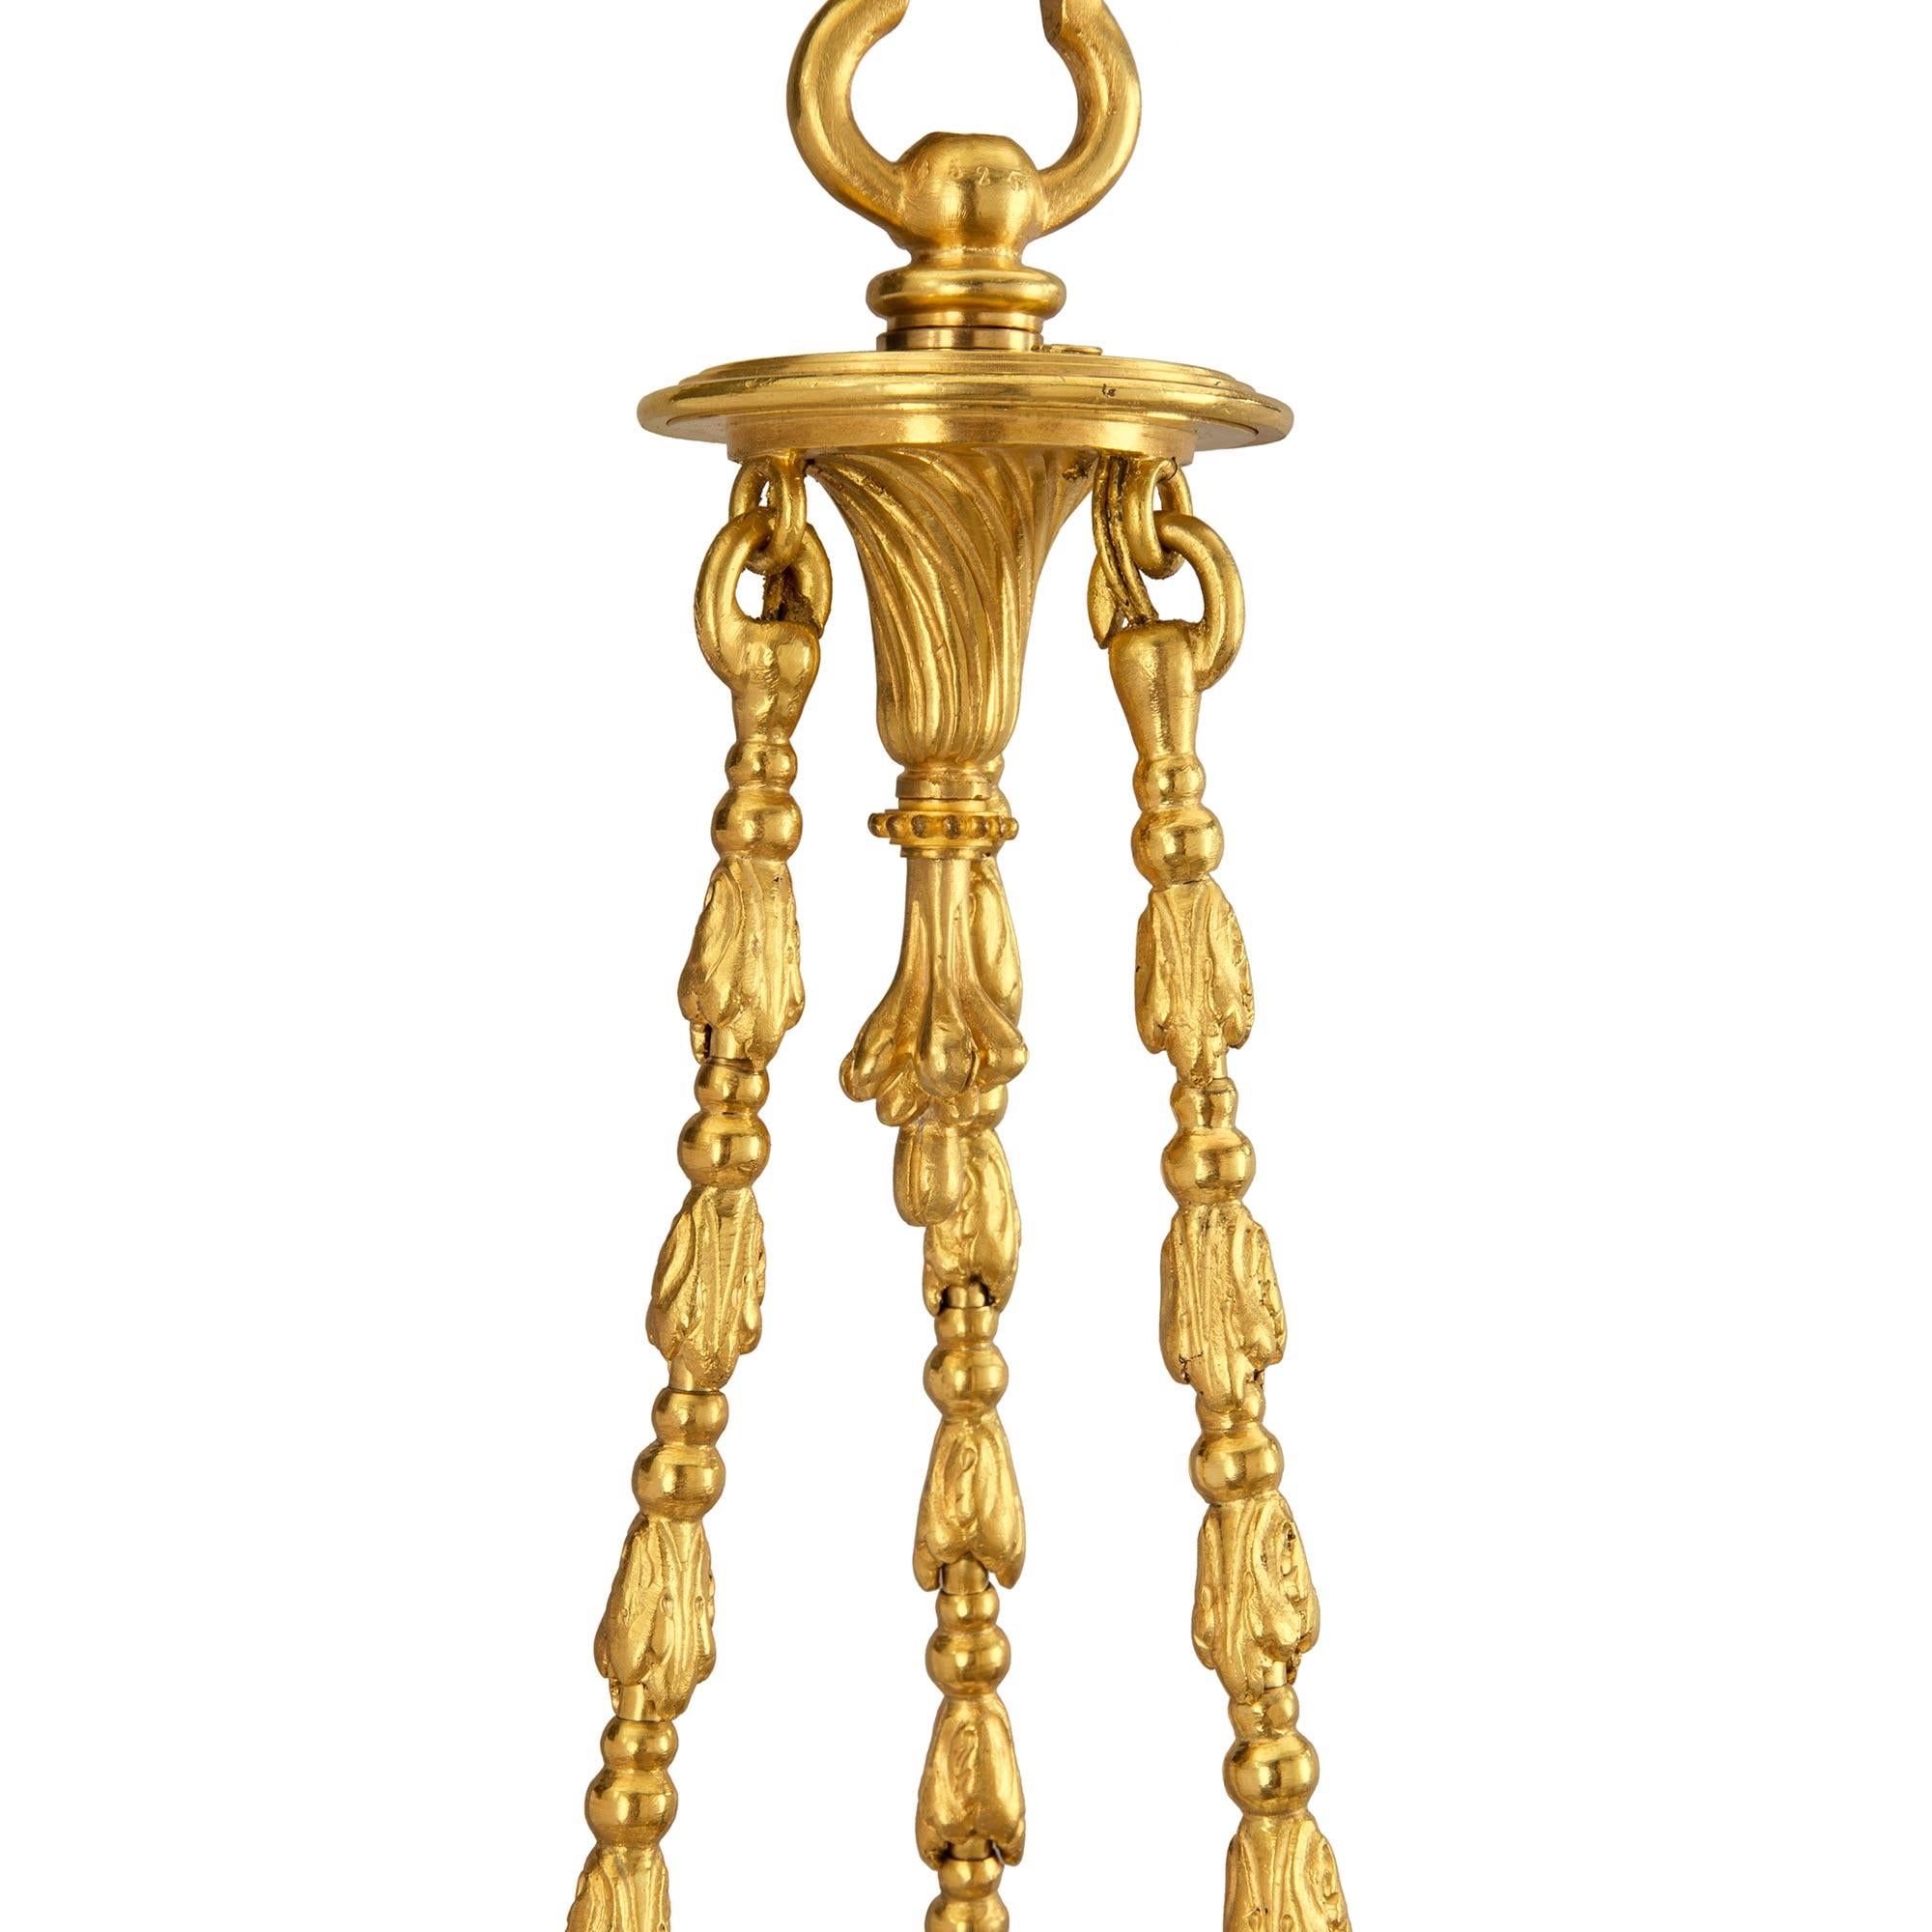 French 19th Century Louis XVI Style Belle Époque Chandelier Attributed to Dasson In Good Condition For Sale In West Palm Beach, FL